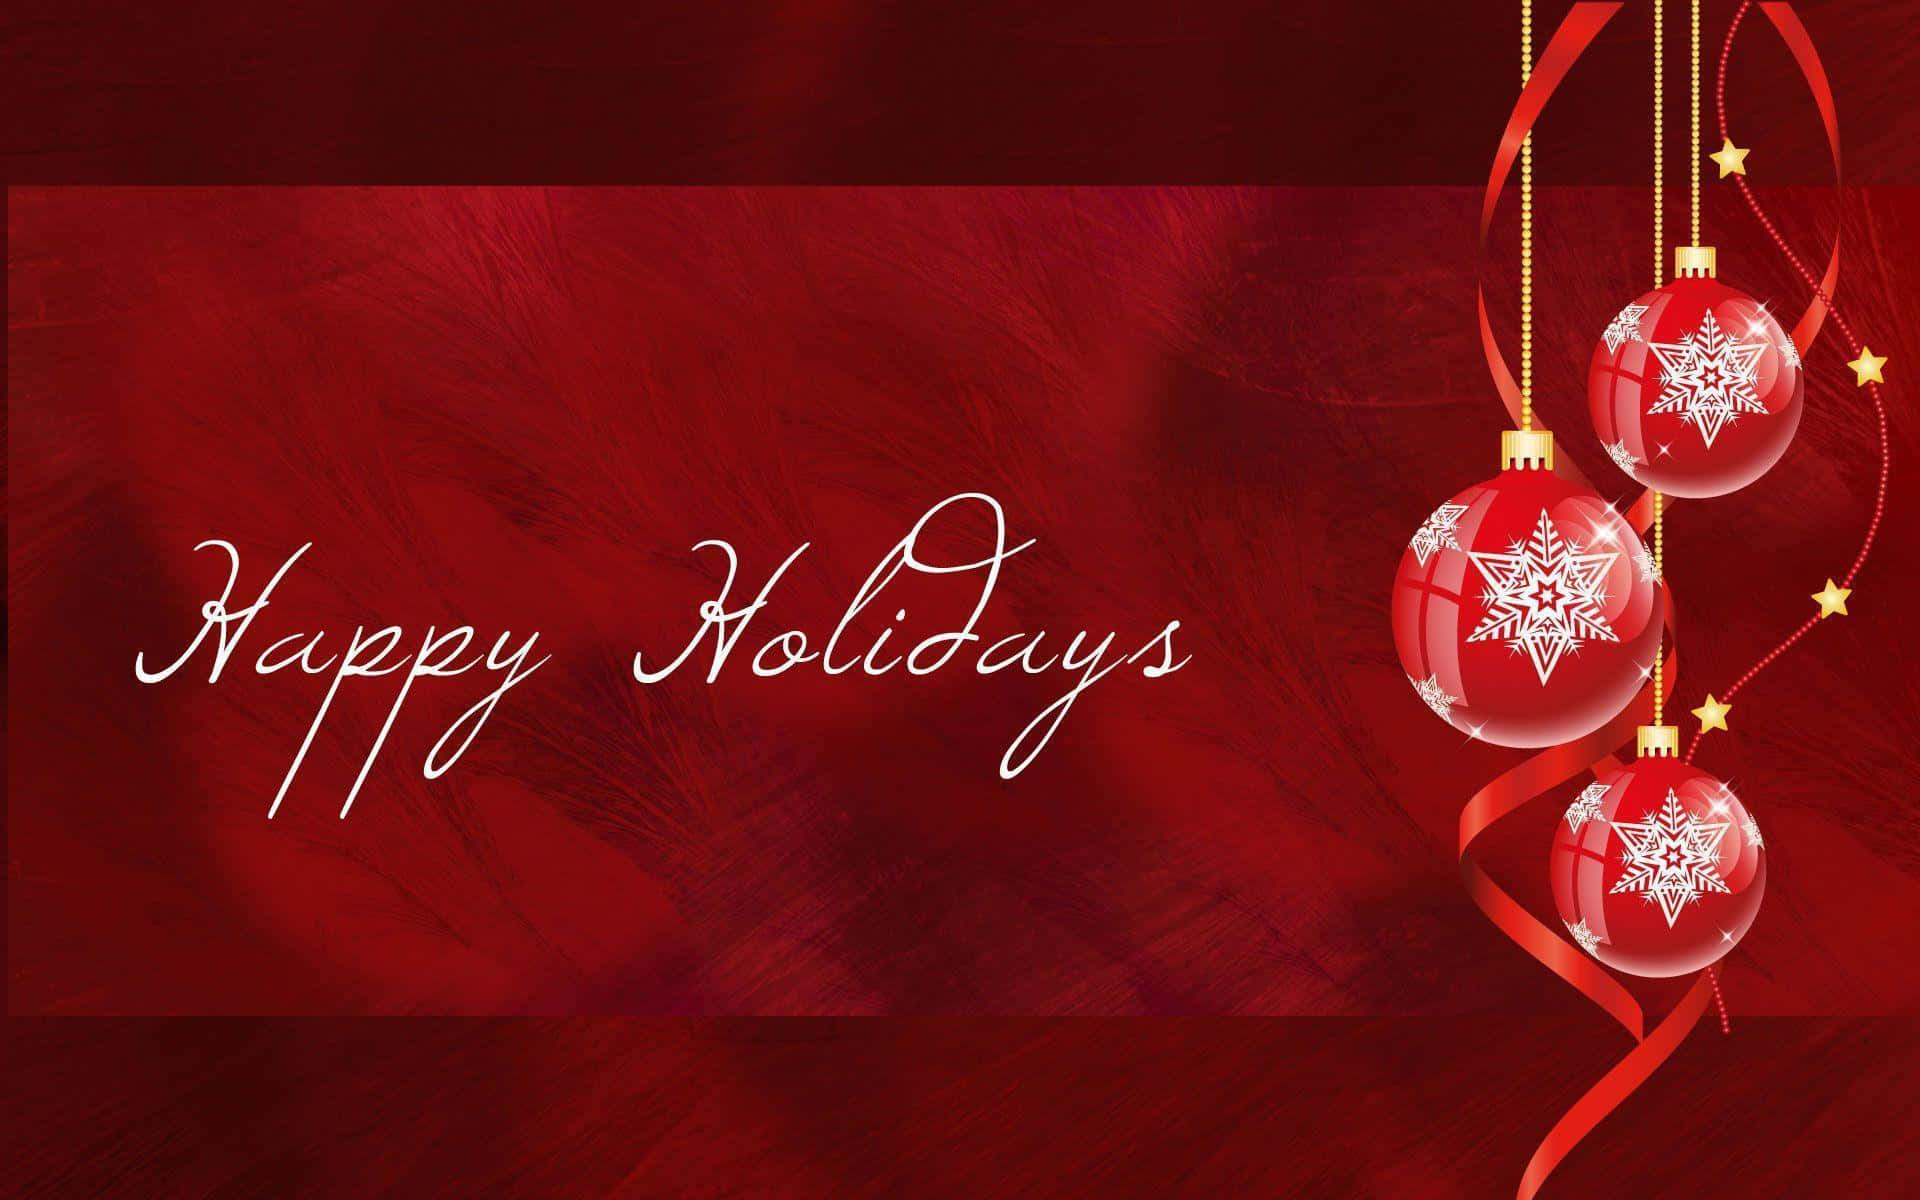 Celebrate Happy Holidays with This Sparkling Desktop Image Wallpaper